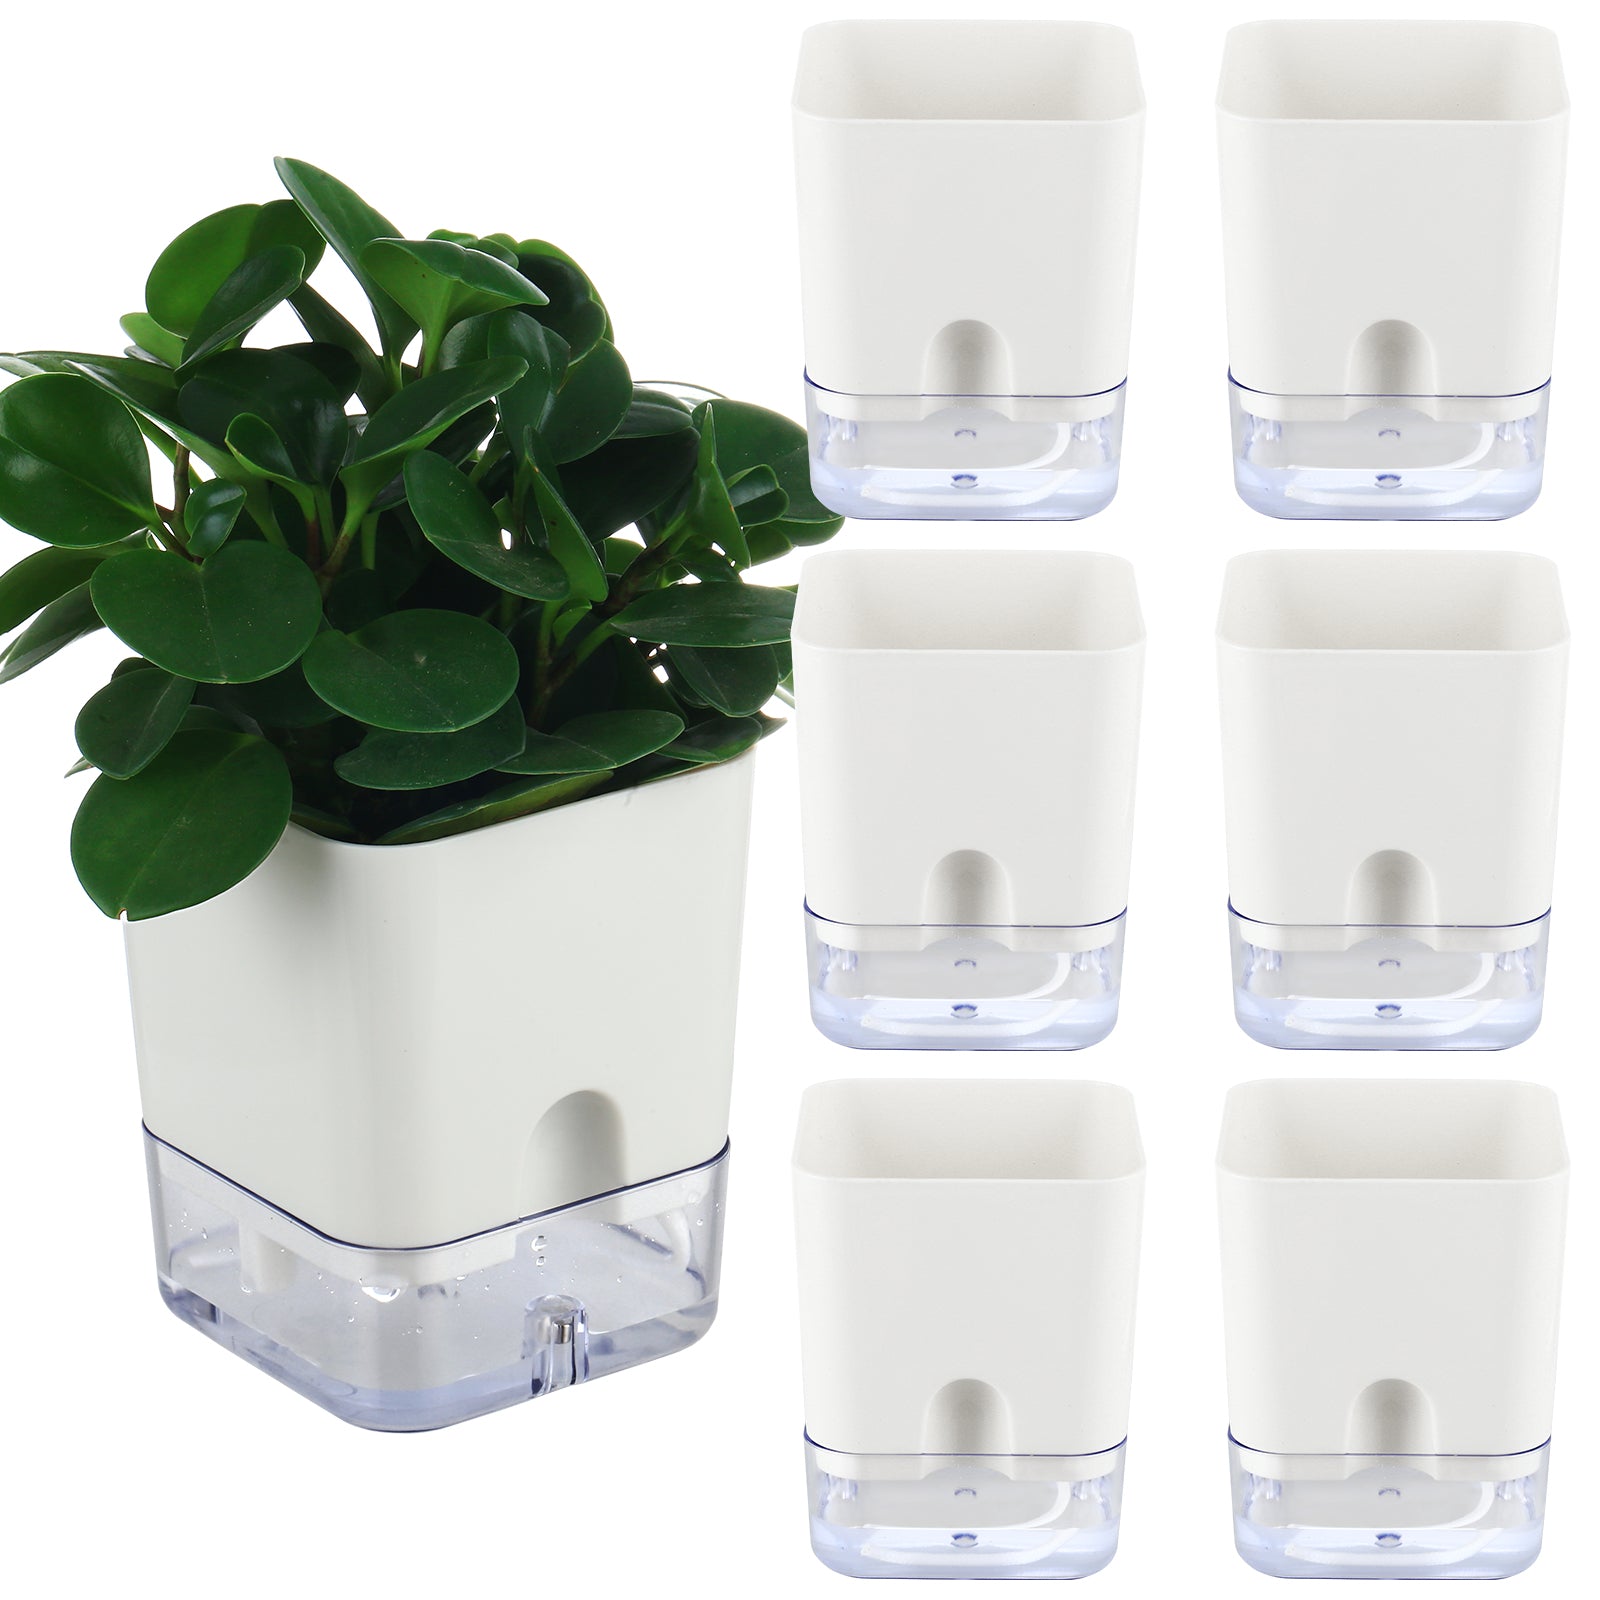 6 Pack-4.3 Inch Square Self Watering Planter Indoor Plants